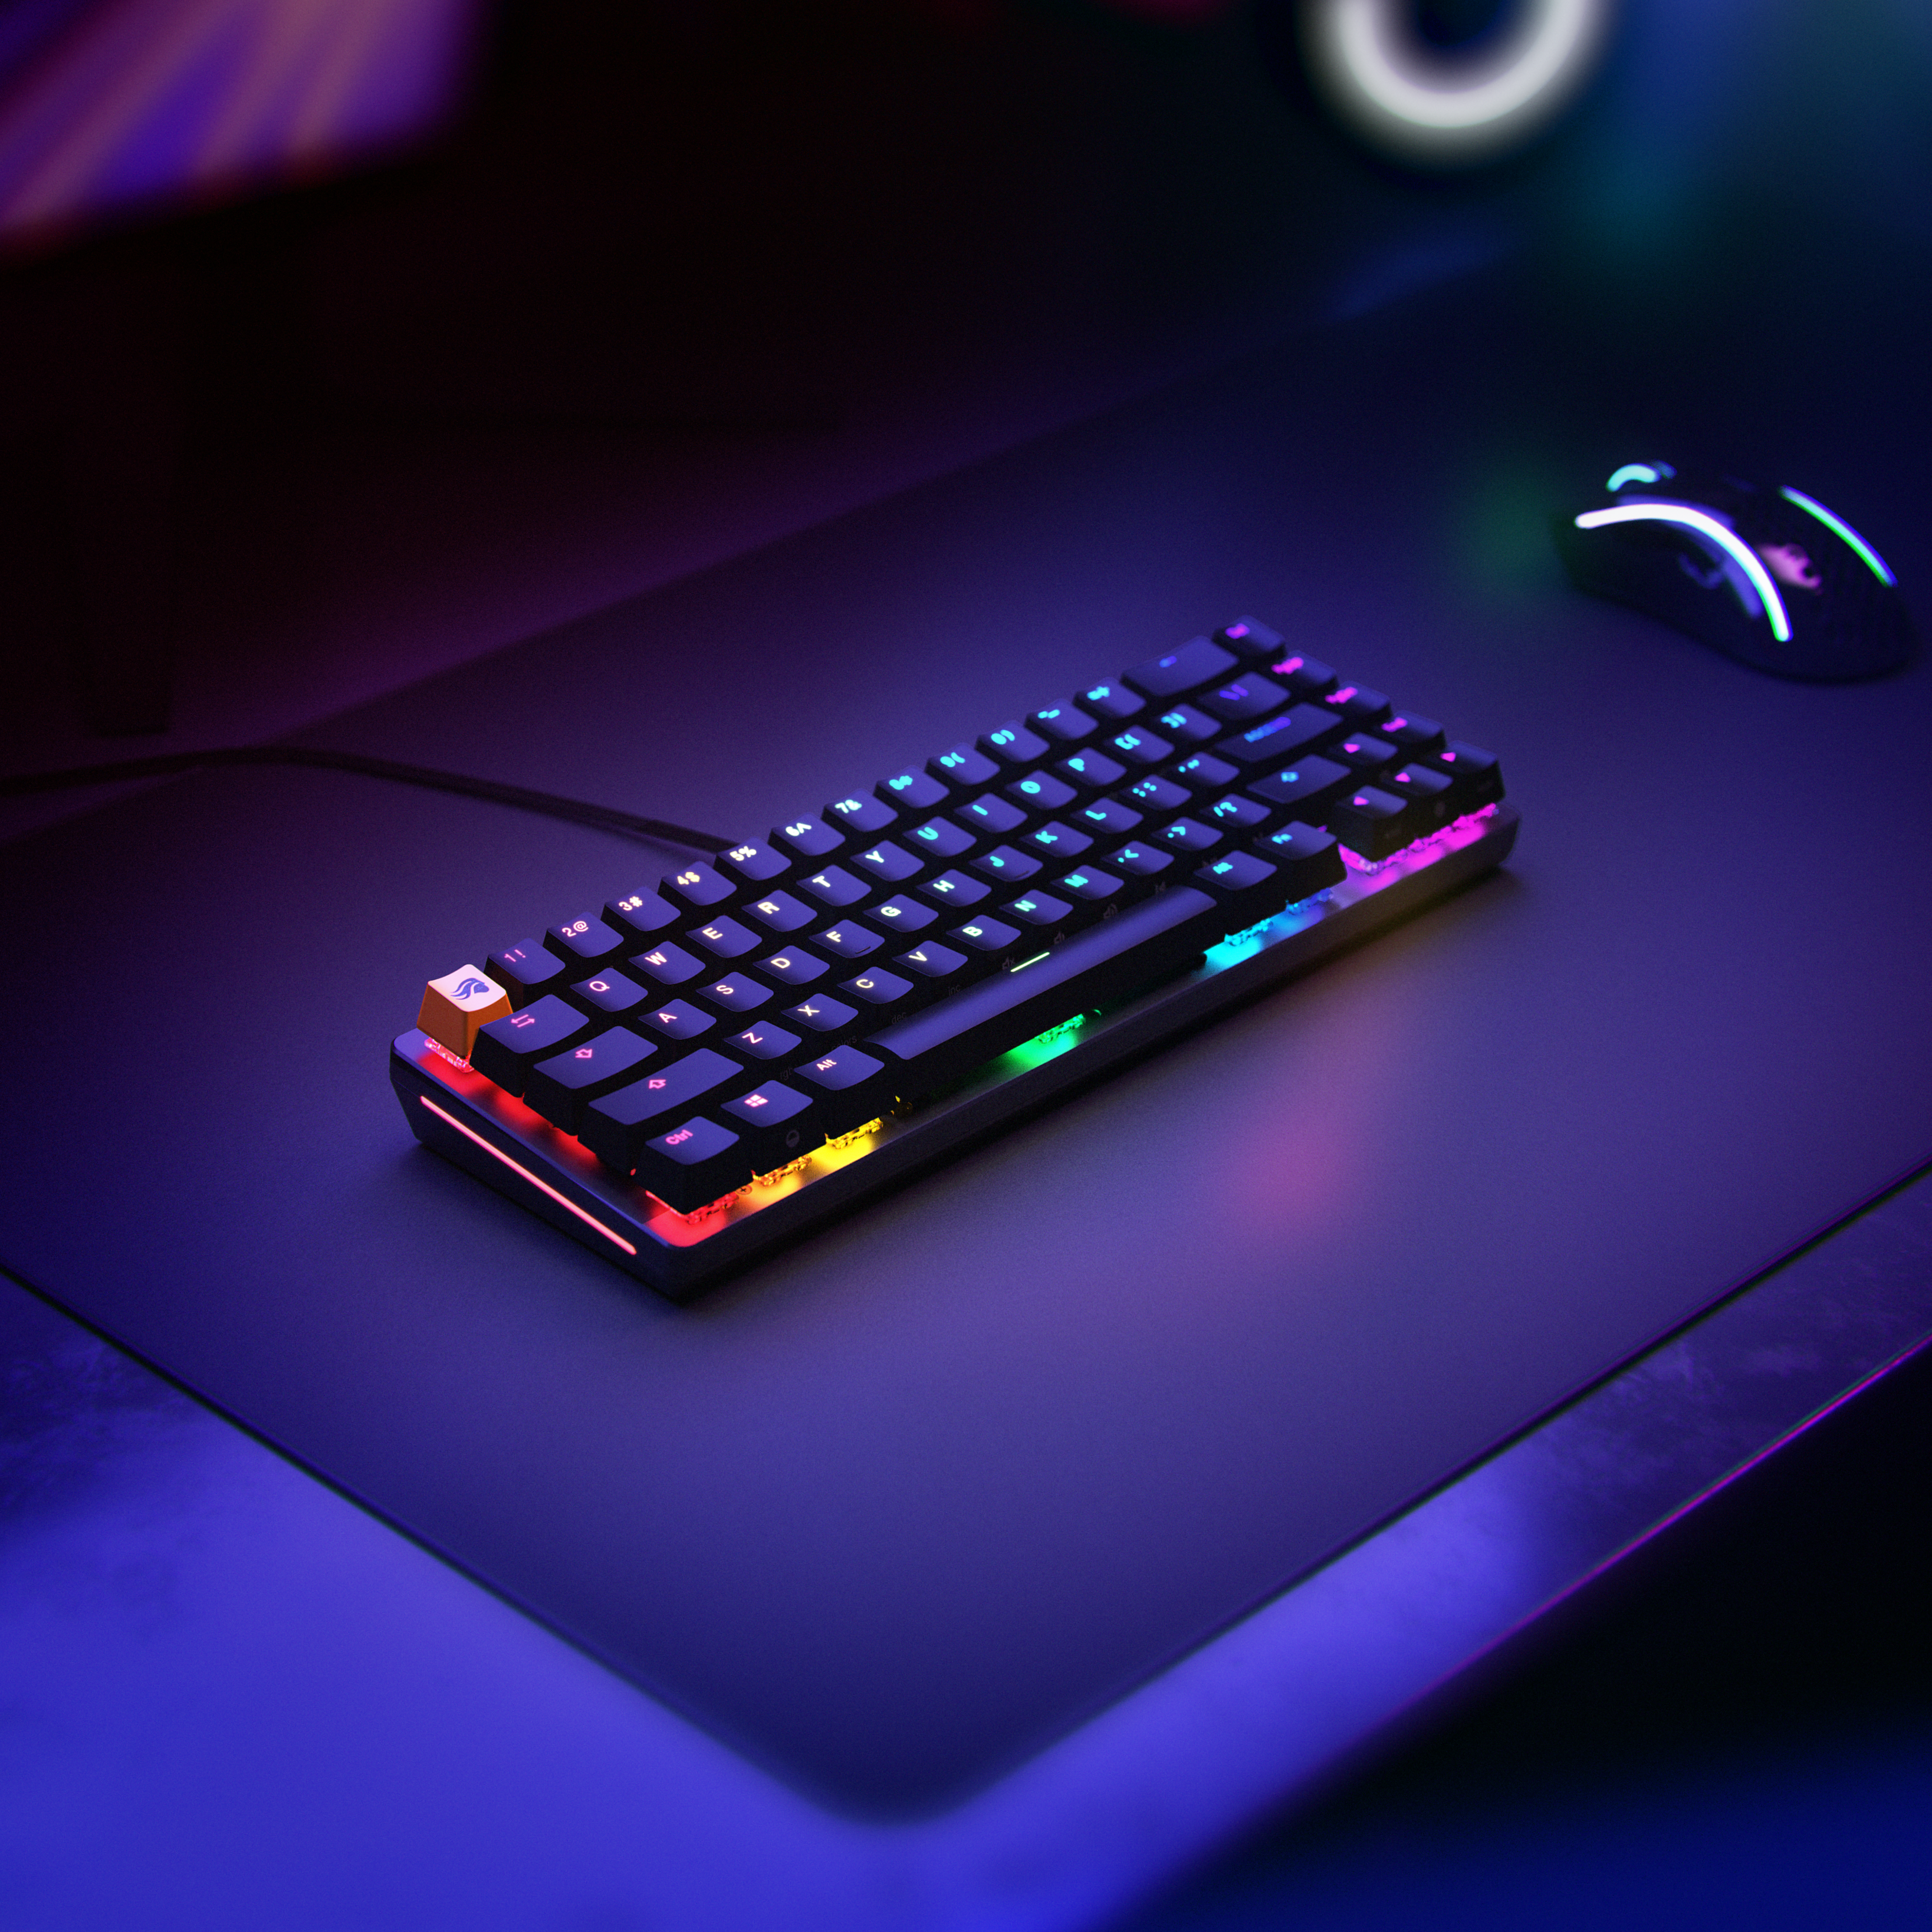 Wired and Wireless Gaming Keyboards - Which One is For You?